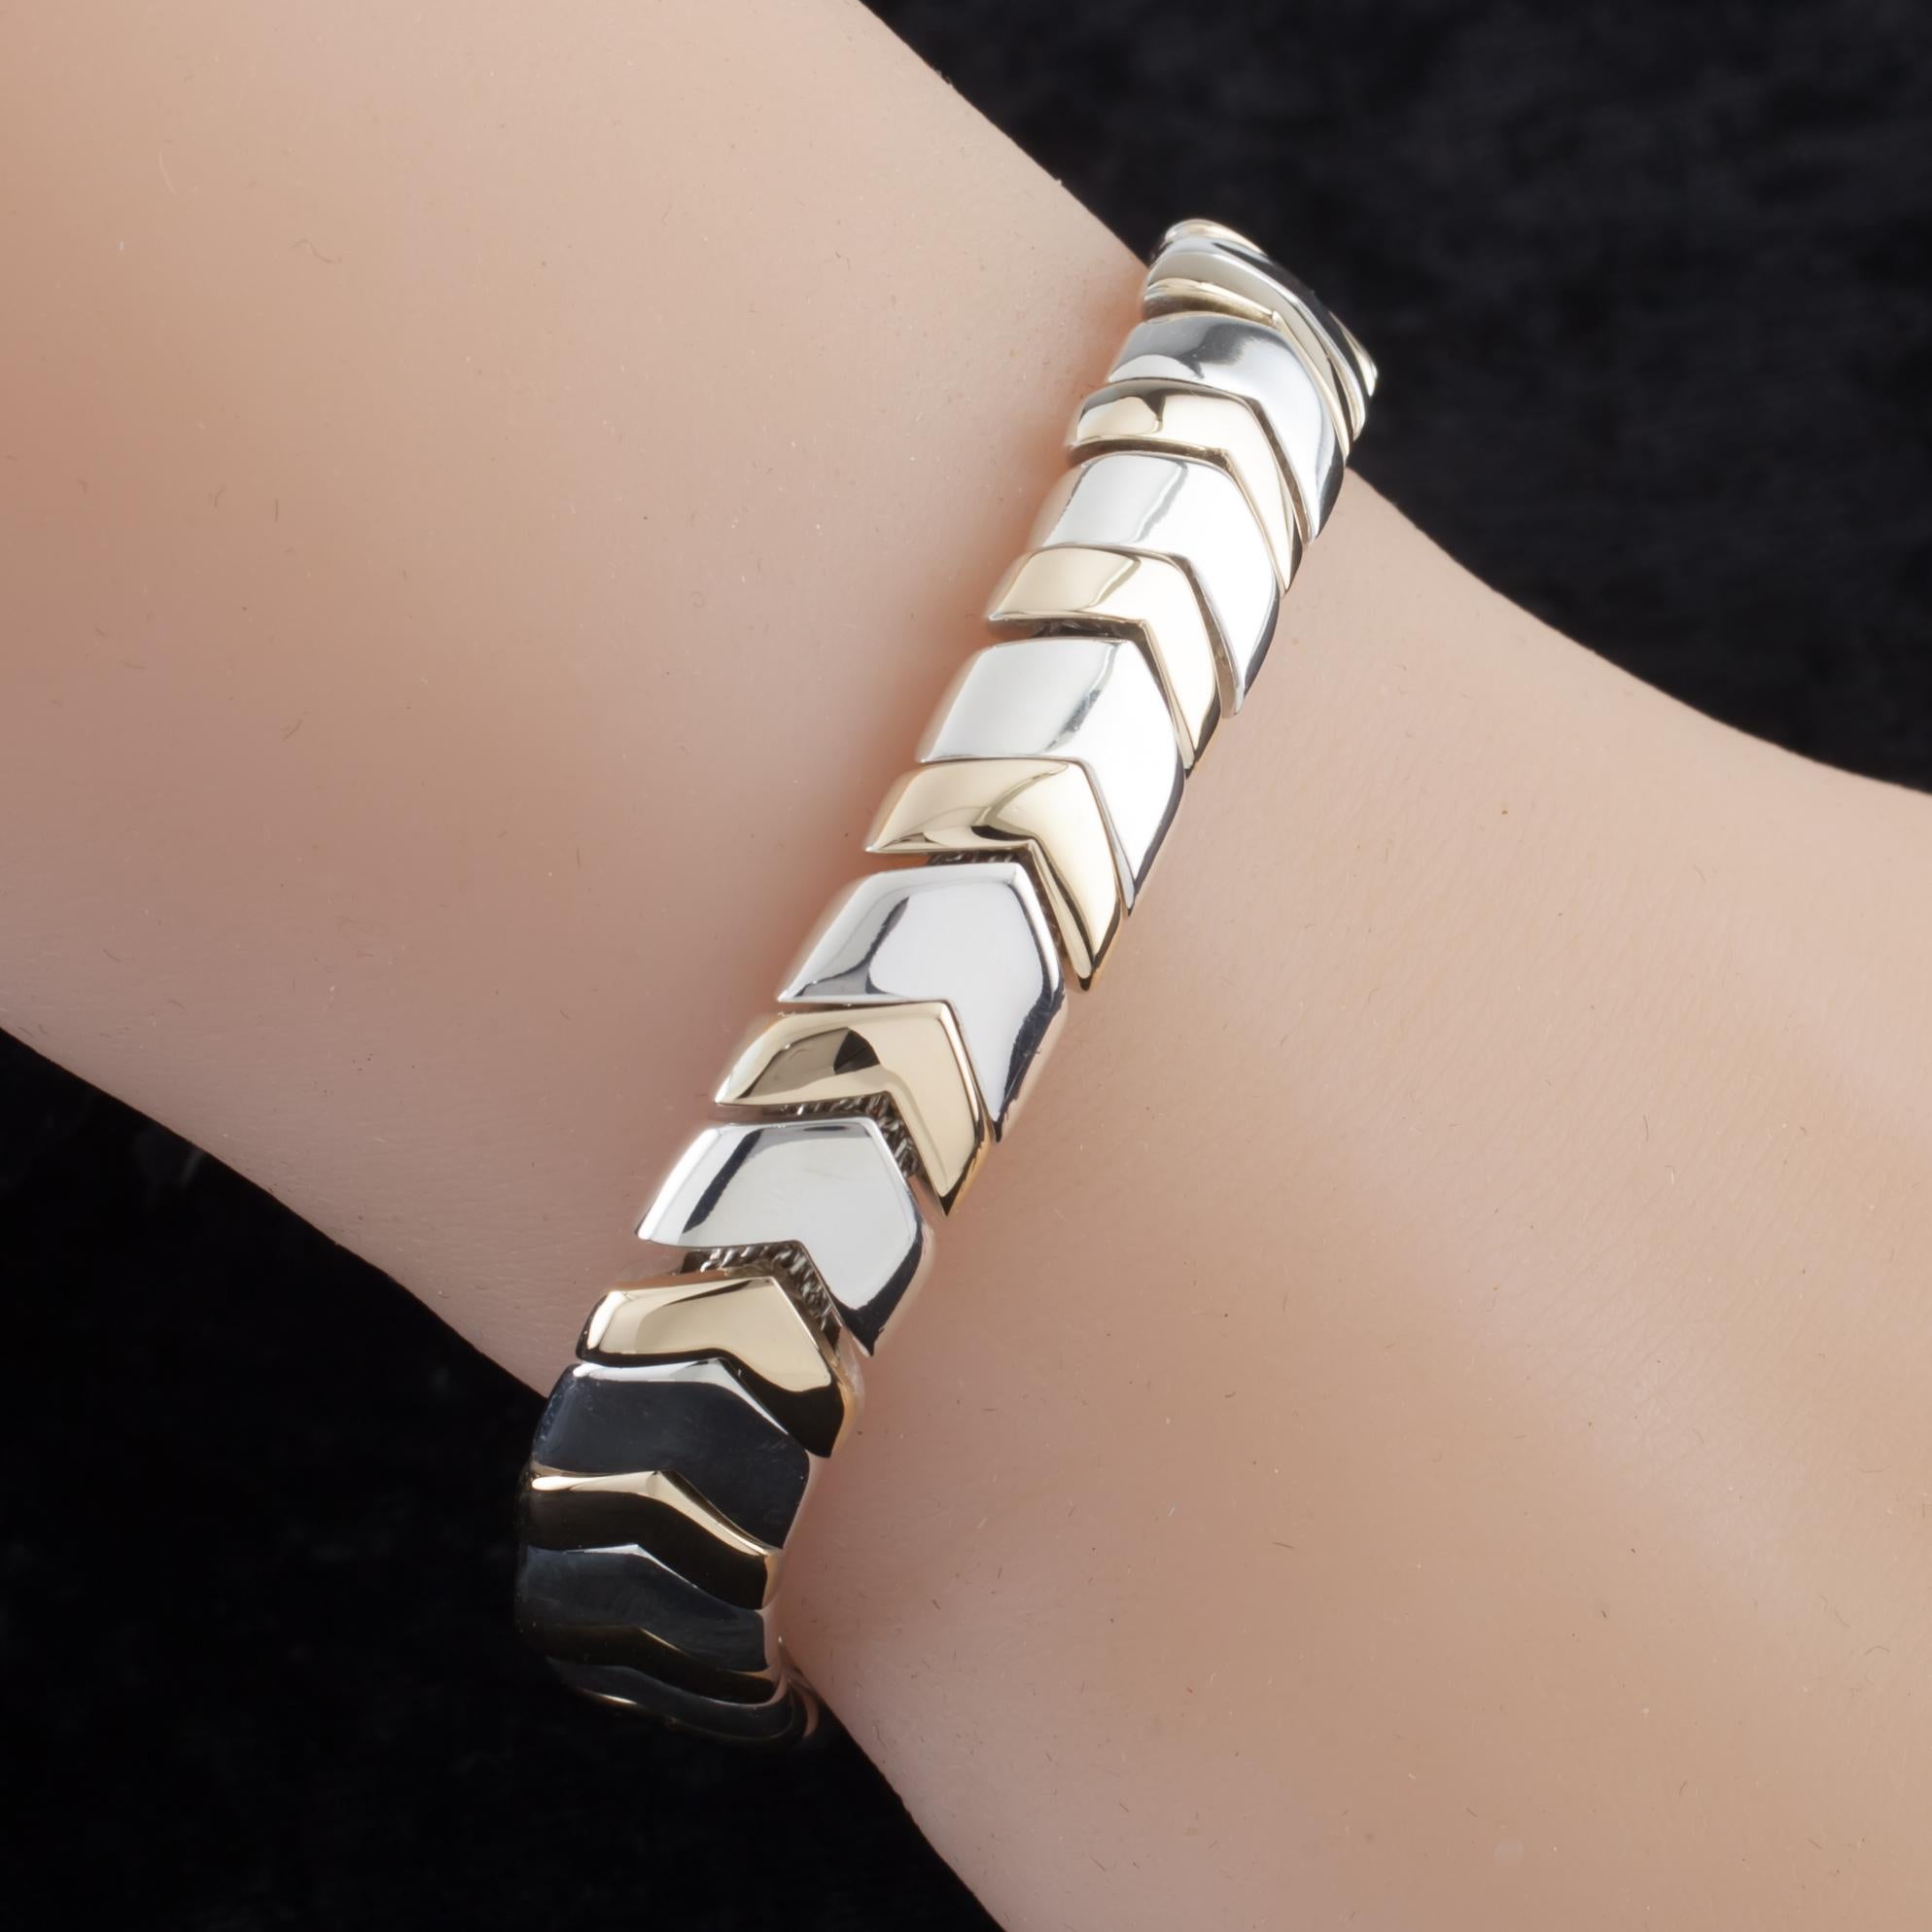 Gorgeous Tiffany & Co. Retired Bracelet
Features Chevron Pattern Articulating Beads Strung over Mesh Bracelet
Gold Links have Silver Bases, gold is applied on top of silver base.
Piece Hallmarked 